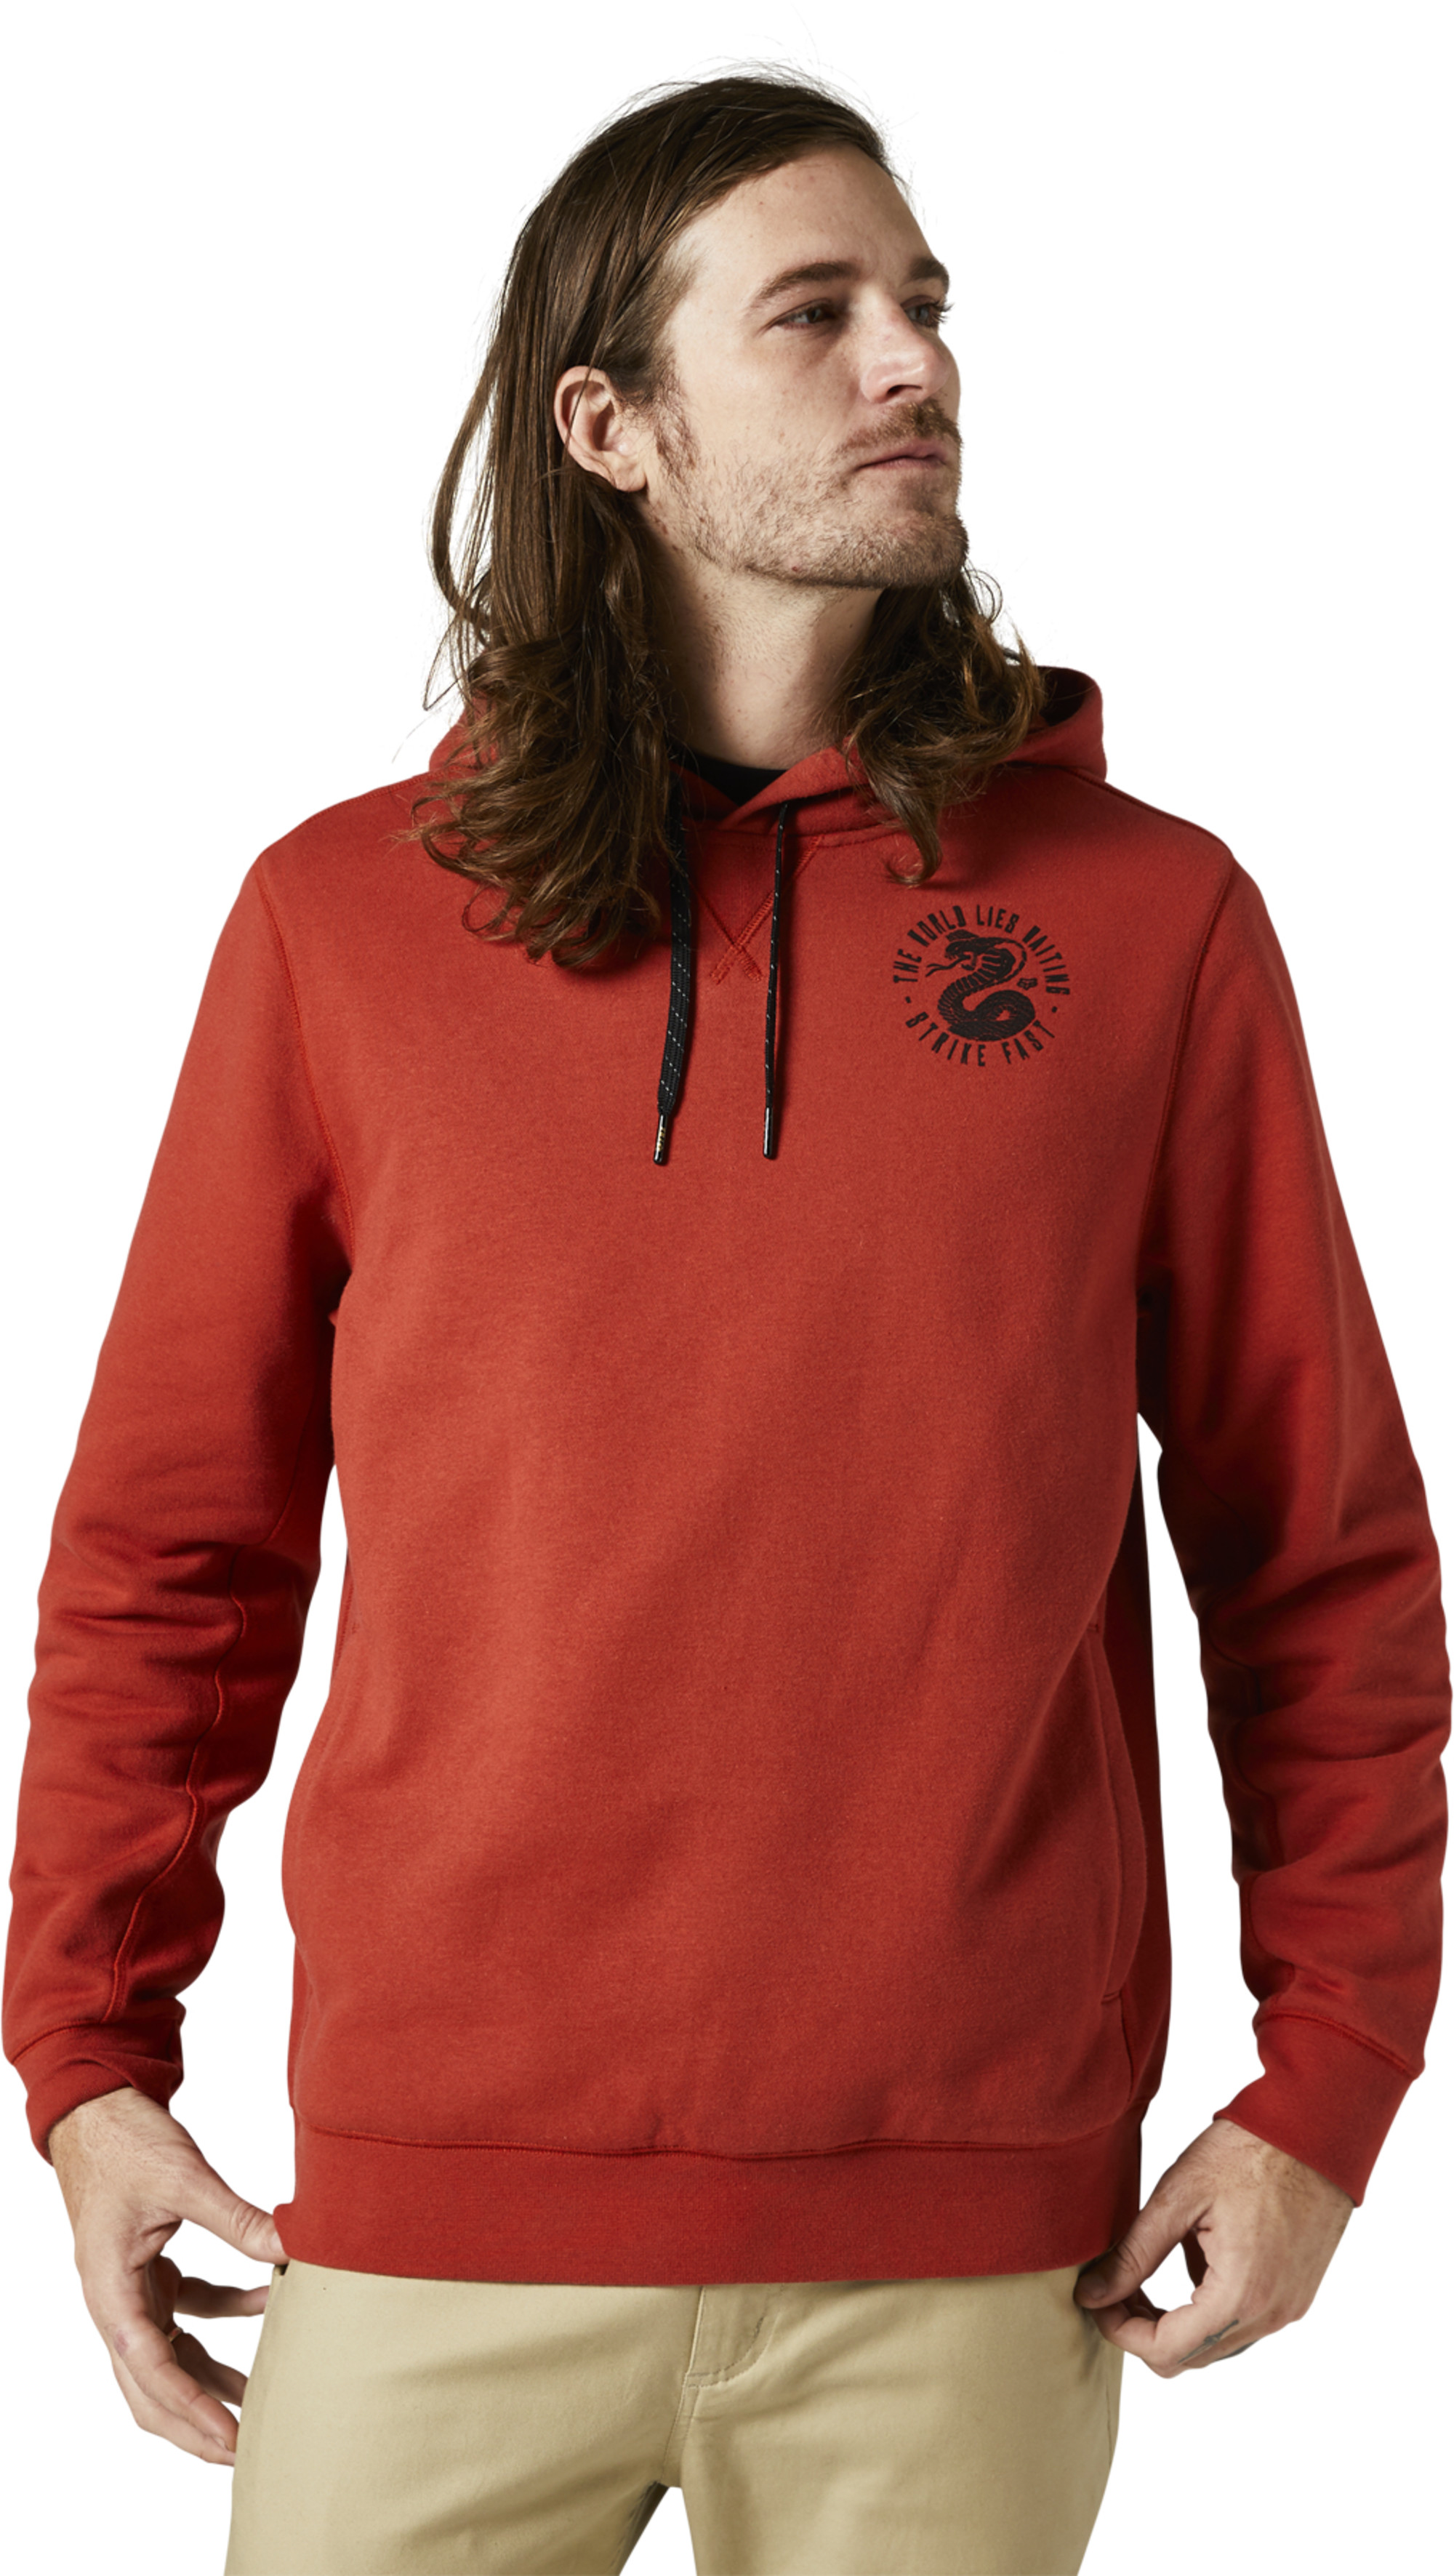   going pro pullover red